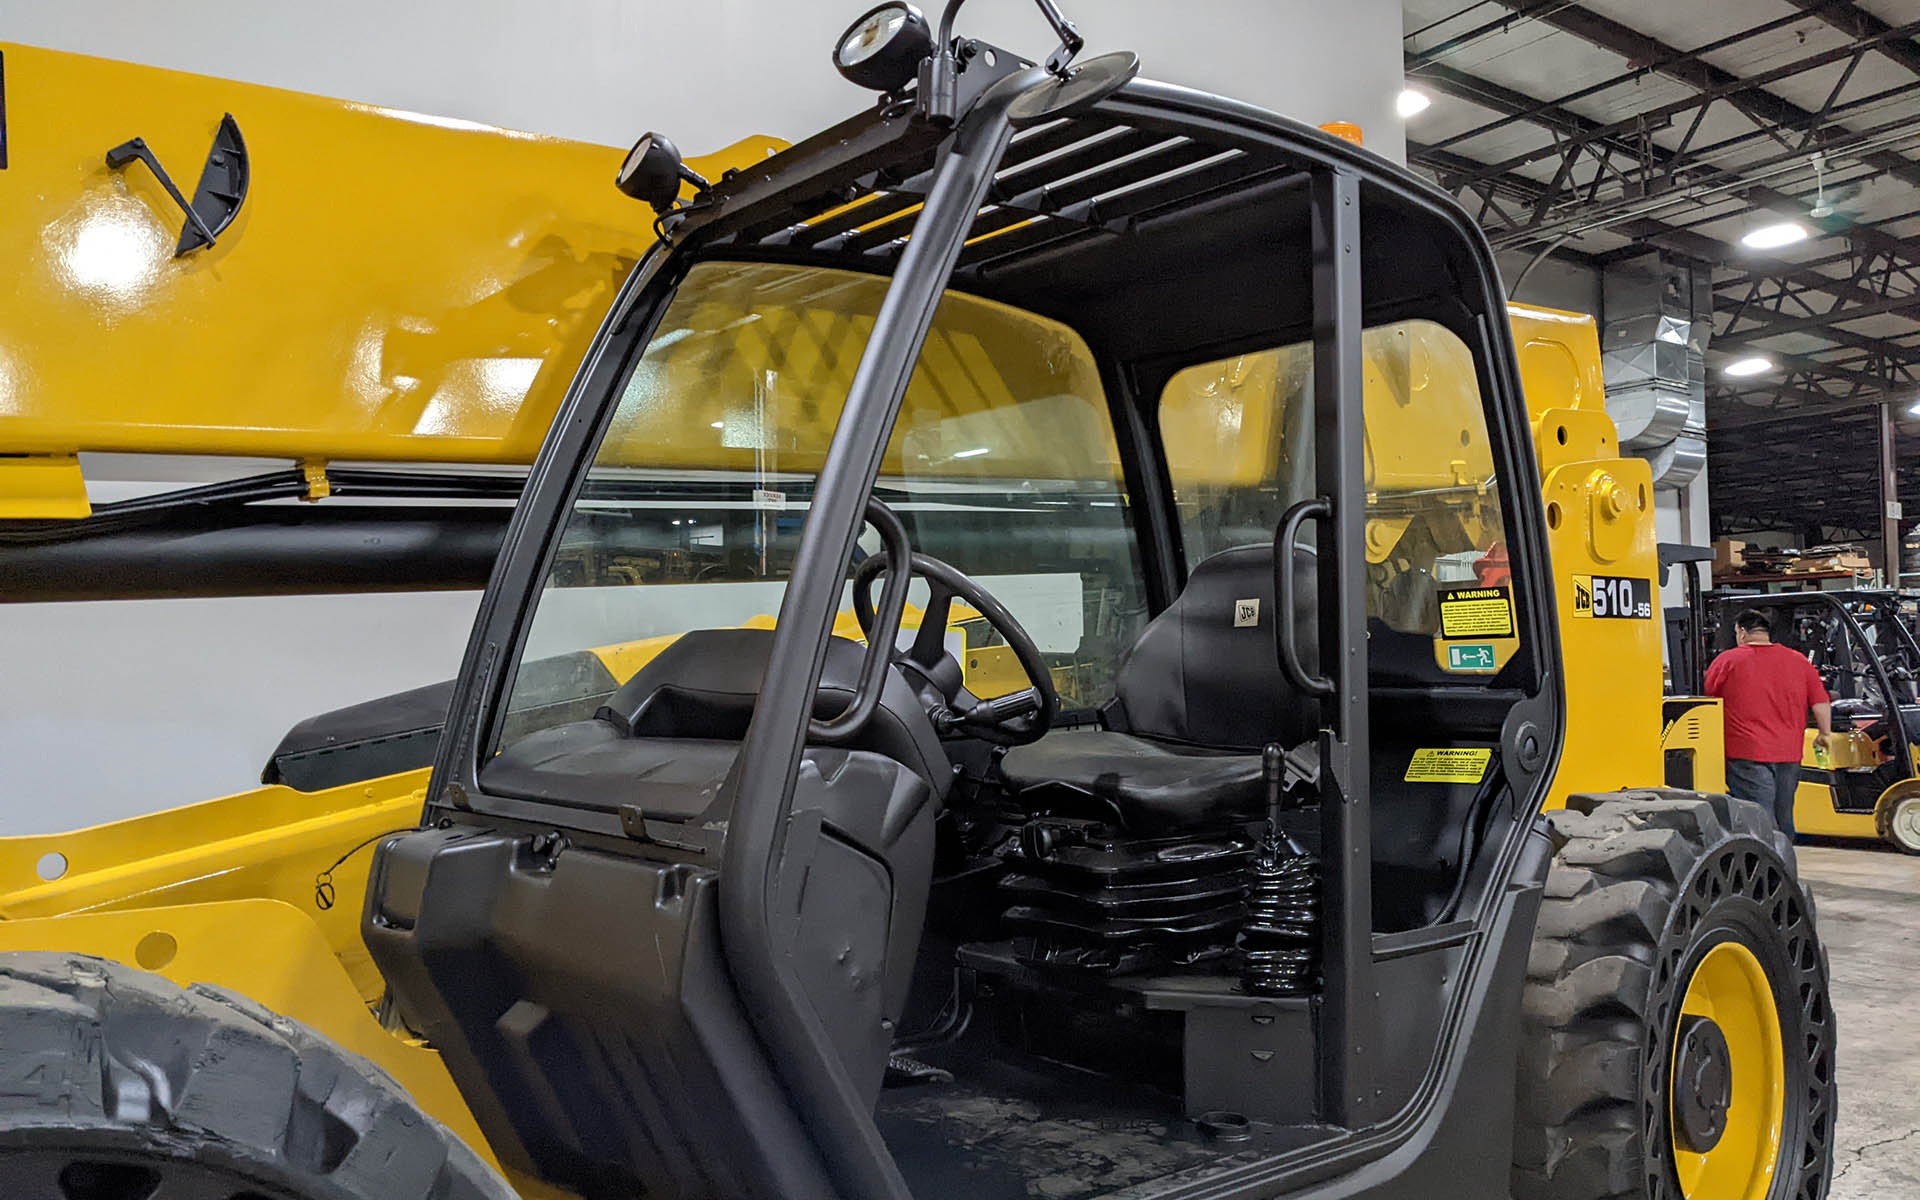 Used 2014 JCB 510-56  | Cary, IL